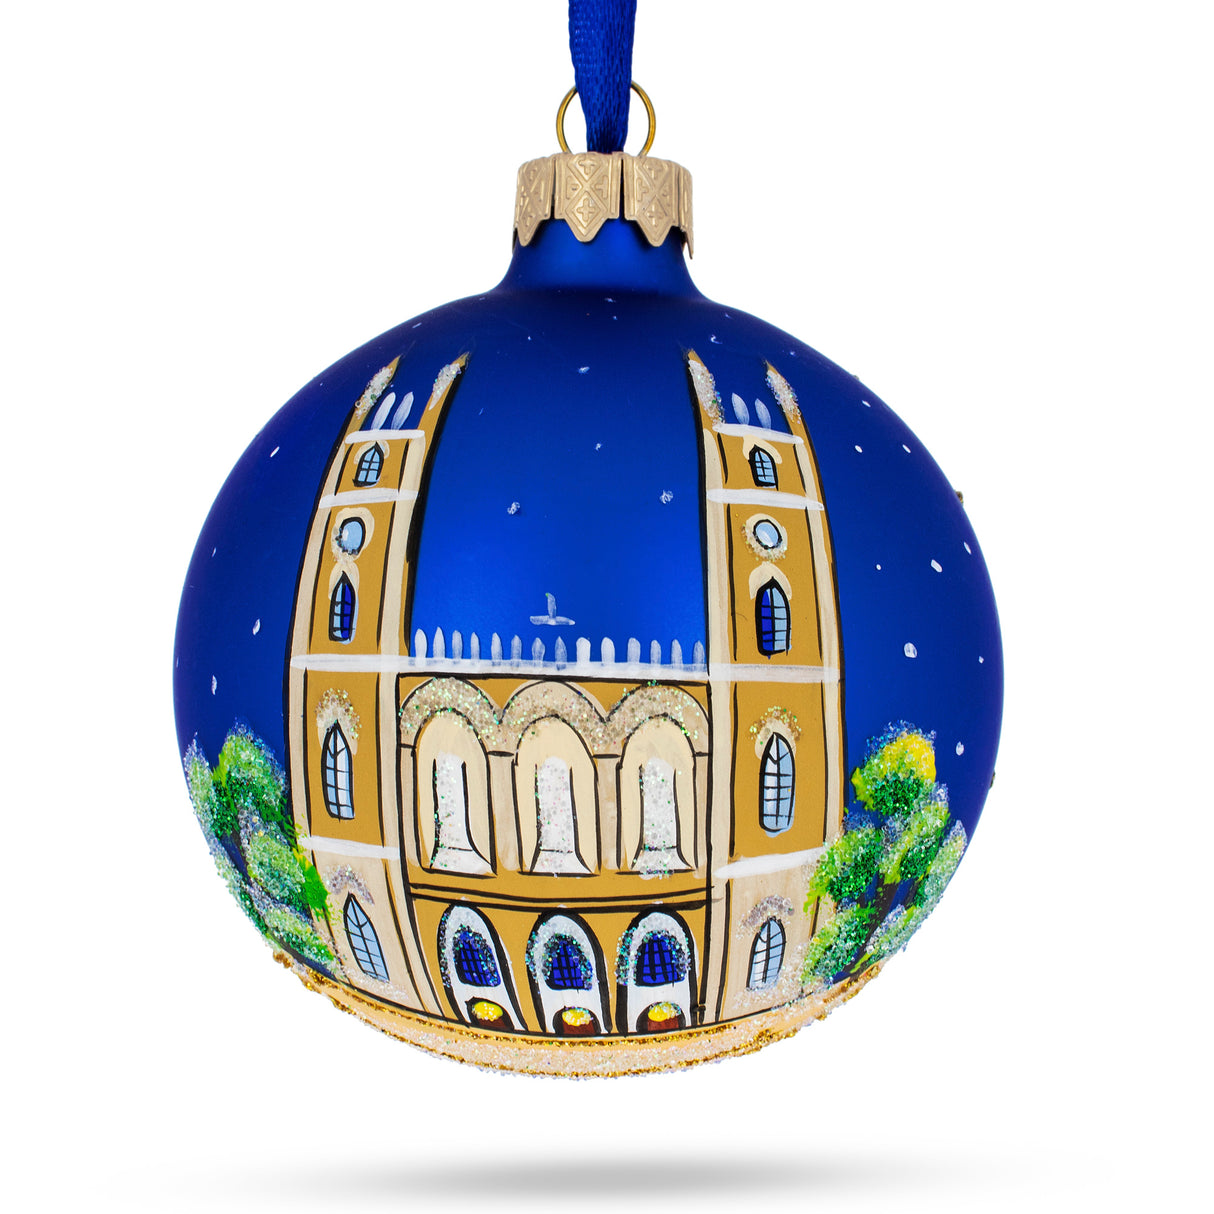 Notre-Dame Basilica, Montreal, Canada Glass Ball Christmas Ornament 3.25 Inches in Multi color, Round shape